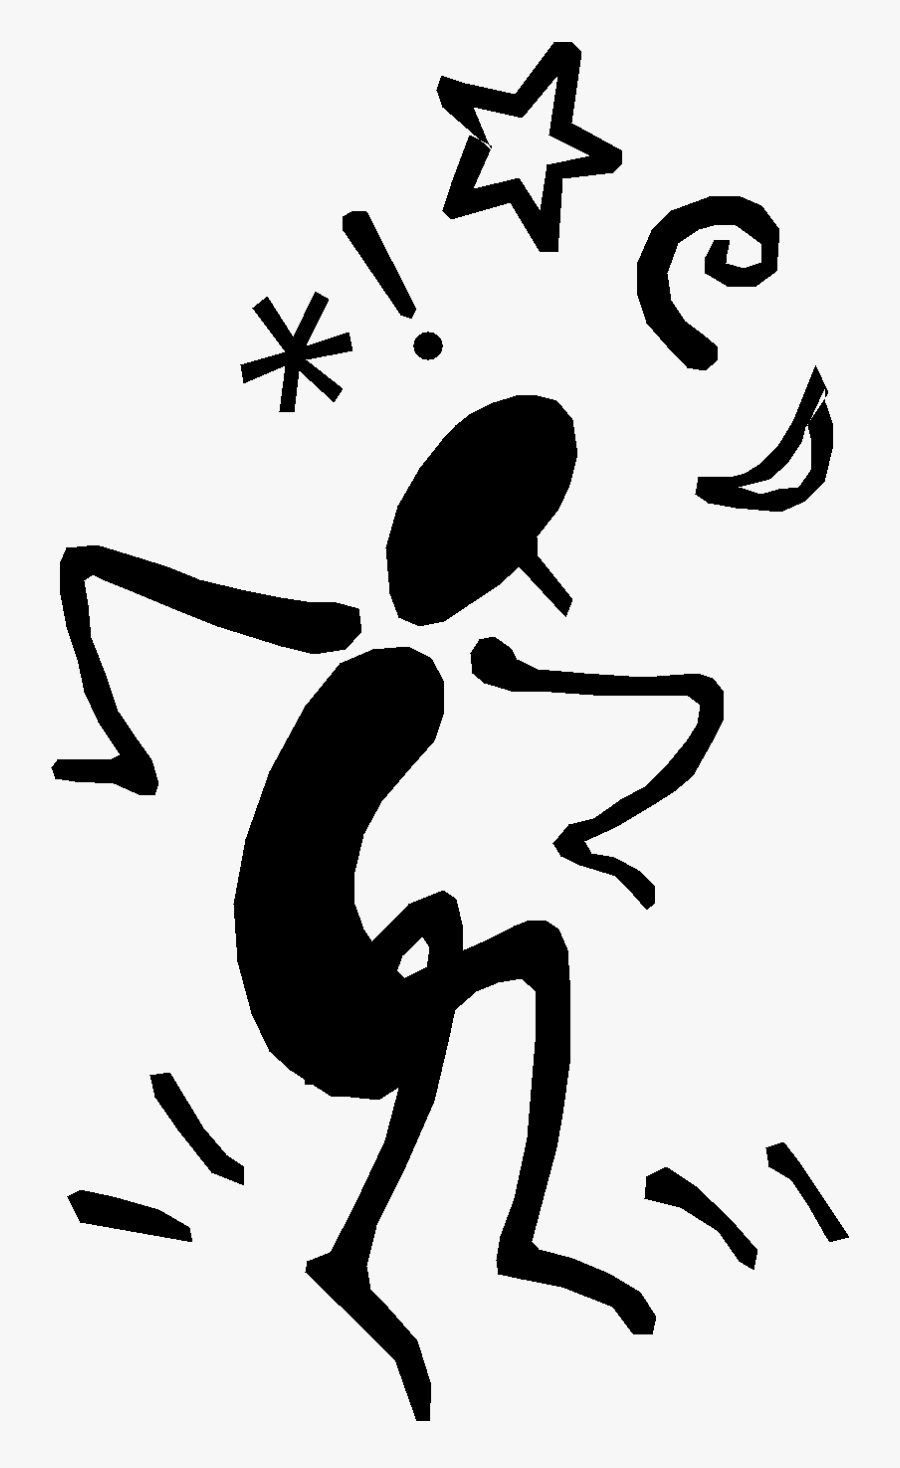 Frustrated Clipart Black And White, Transparent Clipart